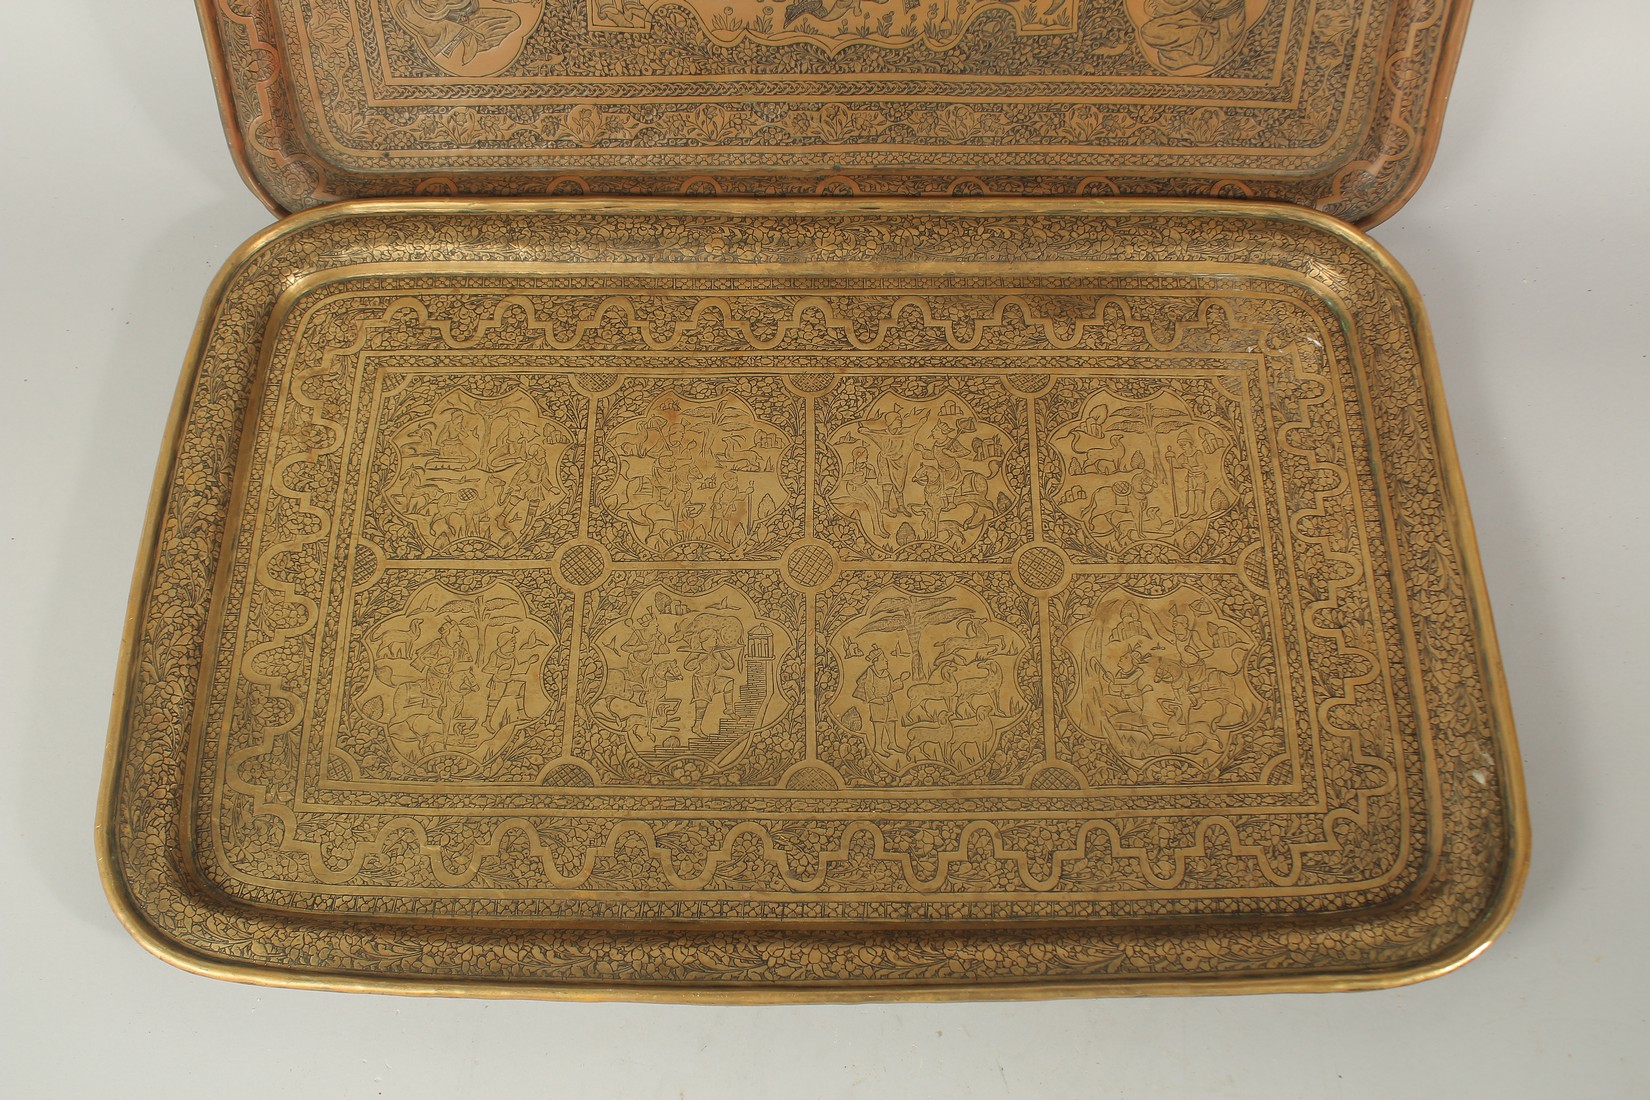 TWO FINE PERSIAN QAJAR BRASS ENGRAVED TRAYS, with pictorial panels, 58cm x 37.5cm and 58.5cm x 38. - Image 3 of 3